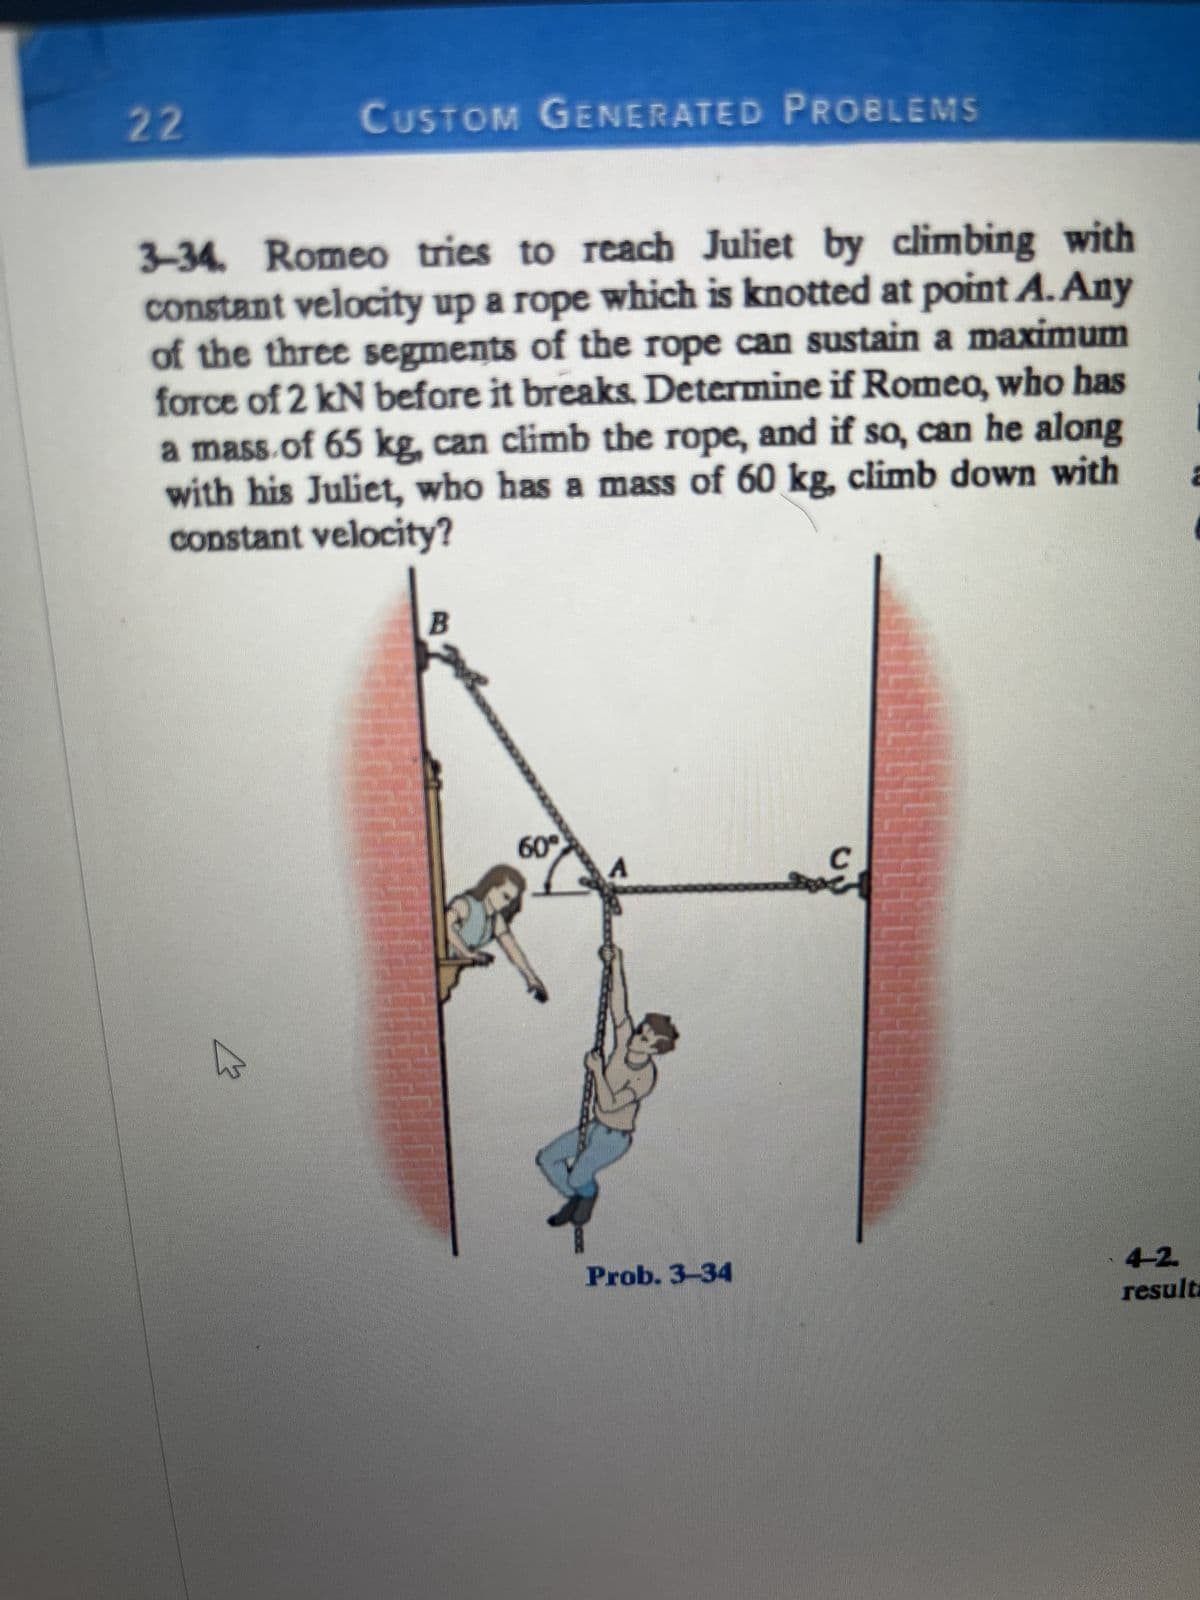 22
CUSTOM GENERATED PROBLEMS
3-34. Romeo tries to reach Juliet by climbing with
constant velocity up a rope which is knotted at point A. Any
of the three segments of the rope can sustain a maximum
force of 2 kN before it breaks. Determine if Romeo, who has
a mass of 65 kg, can climb the rope, and if so, can he along
with his Juliet, who has a mass of 60 kg, climb down with
constant velocity?
*********
60°
Prob. 3-34
C
Comm
2
4-2.
resulta